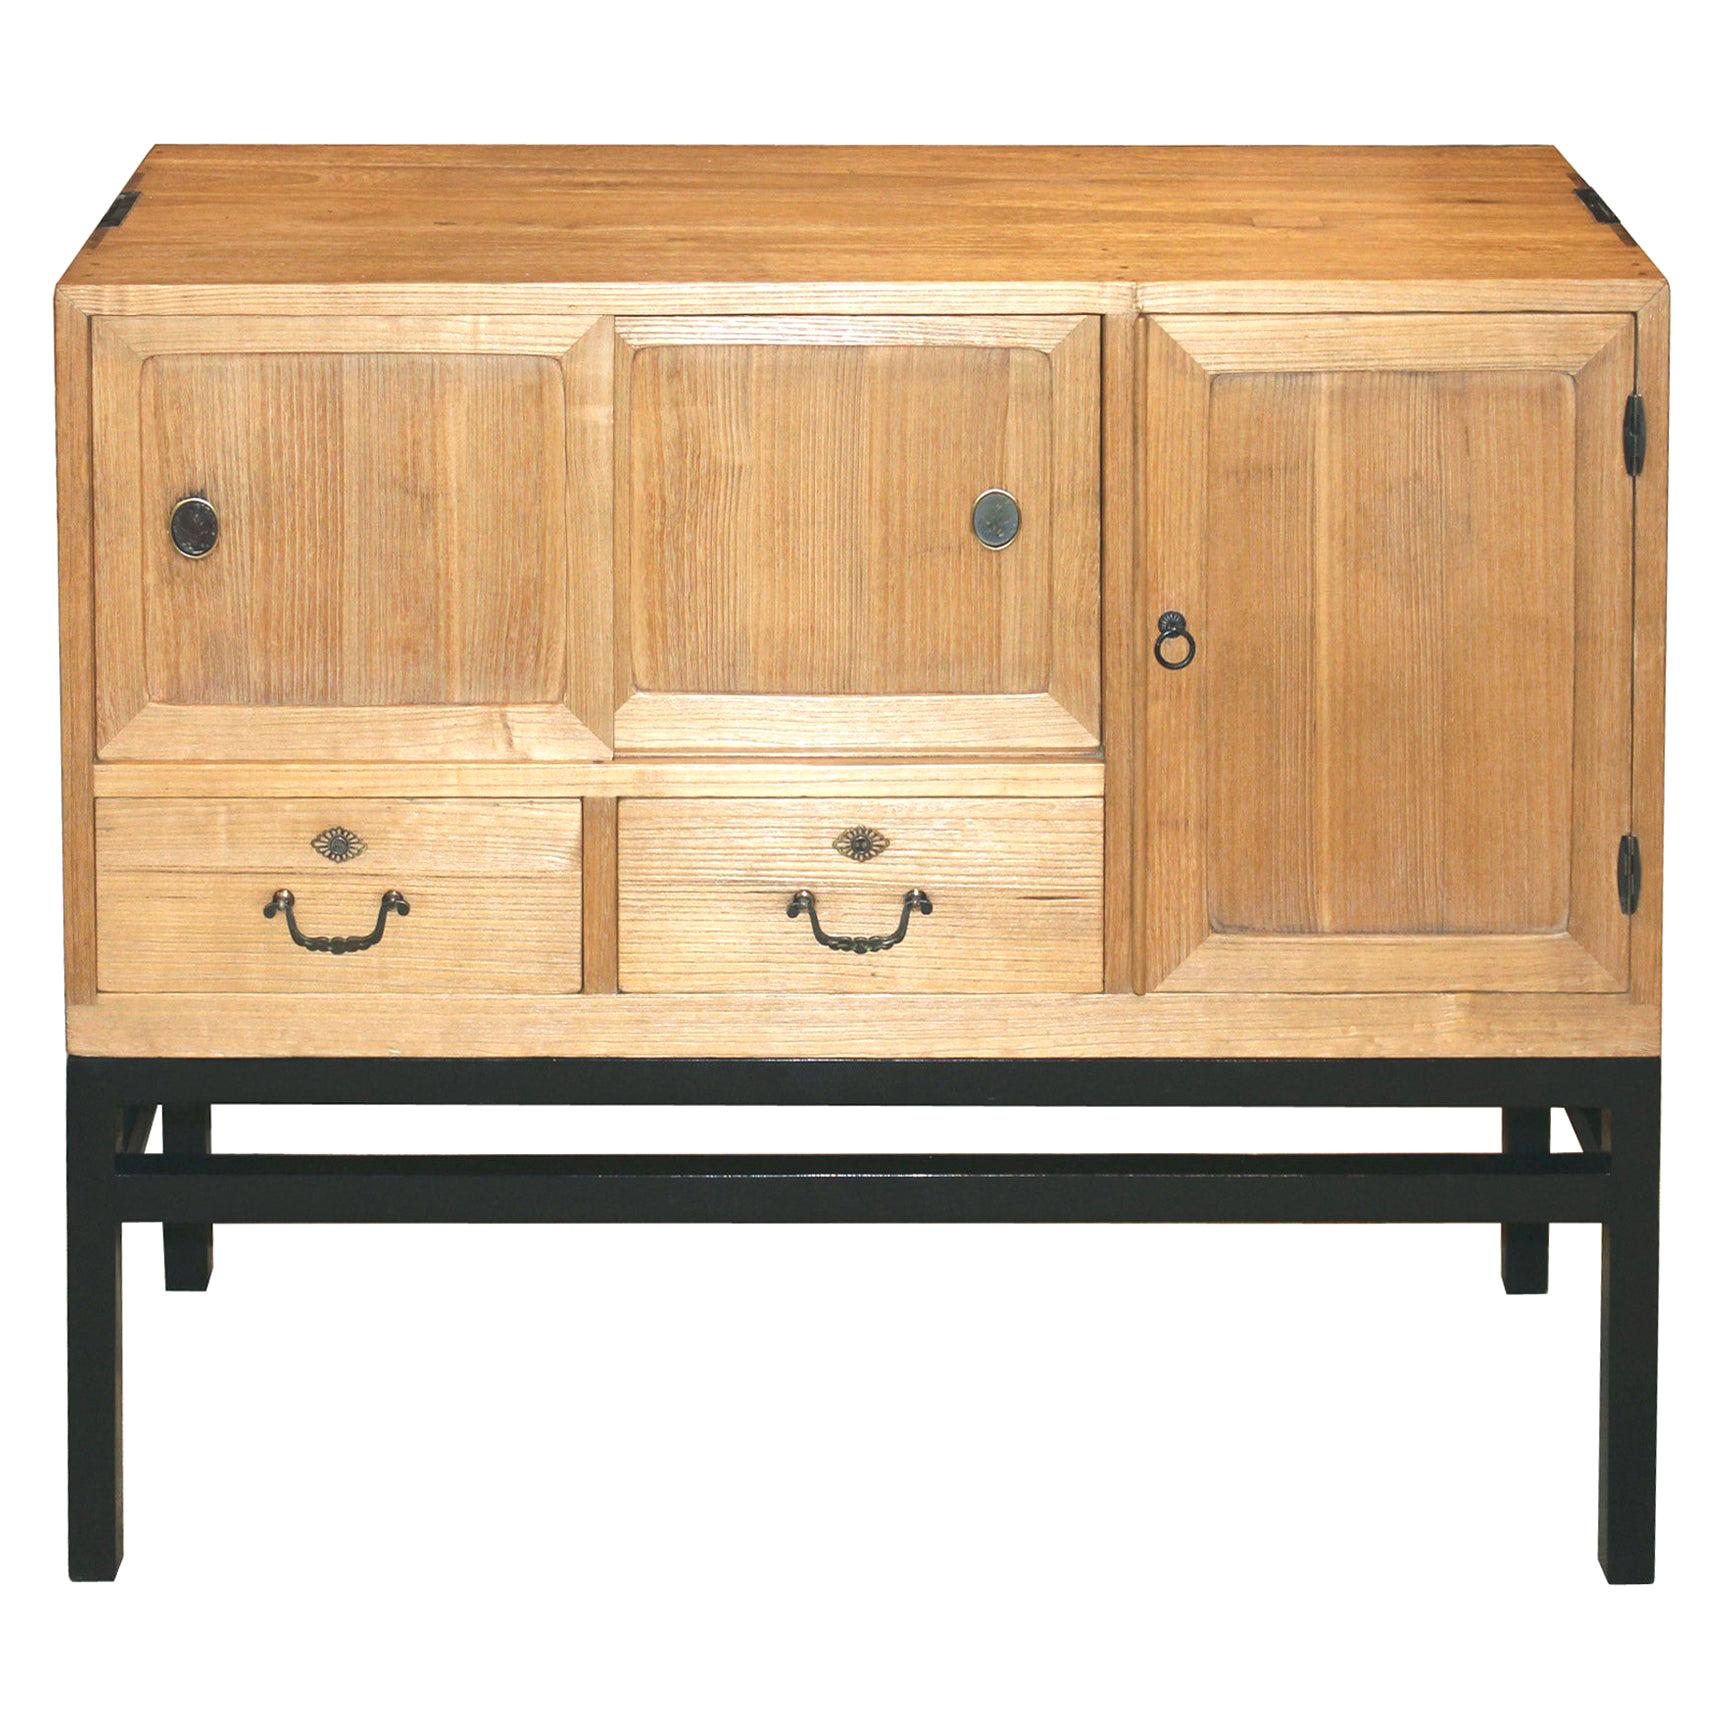 Japanese Chest with Sliding Doors